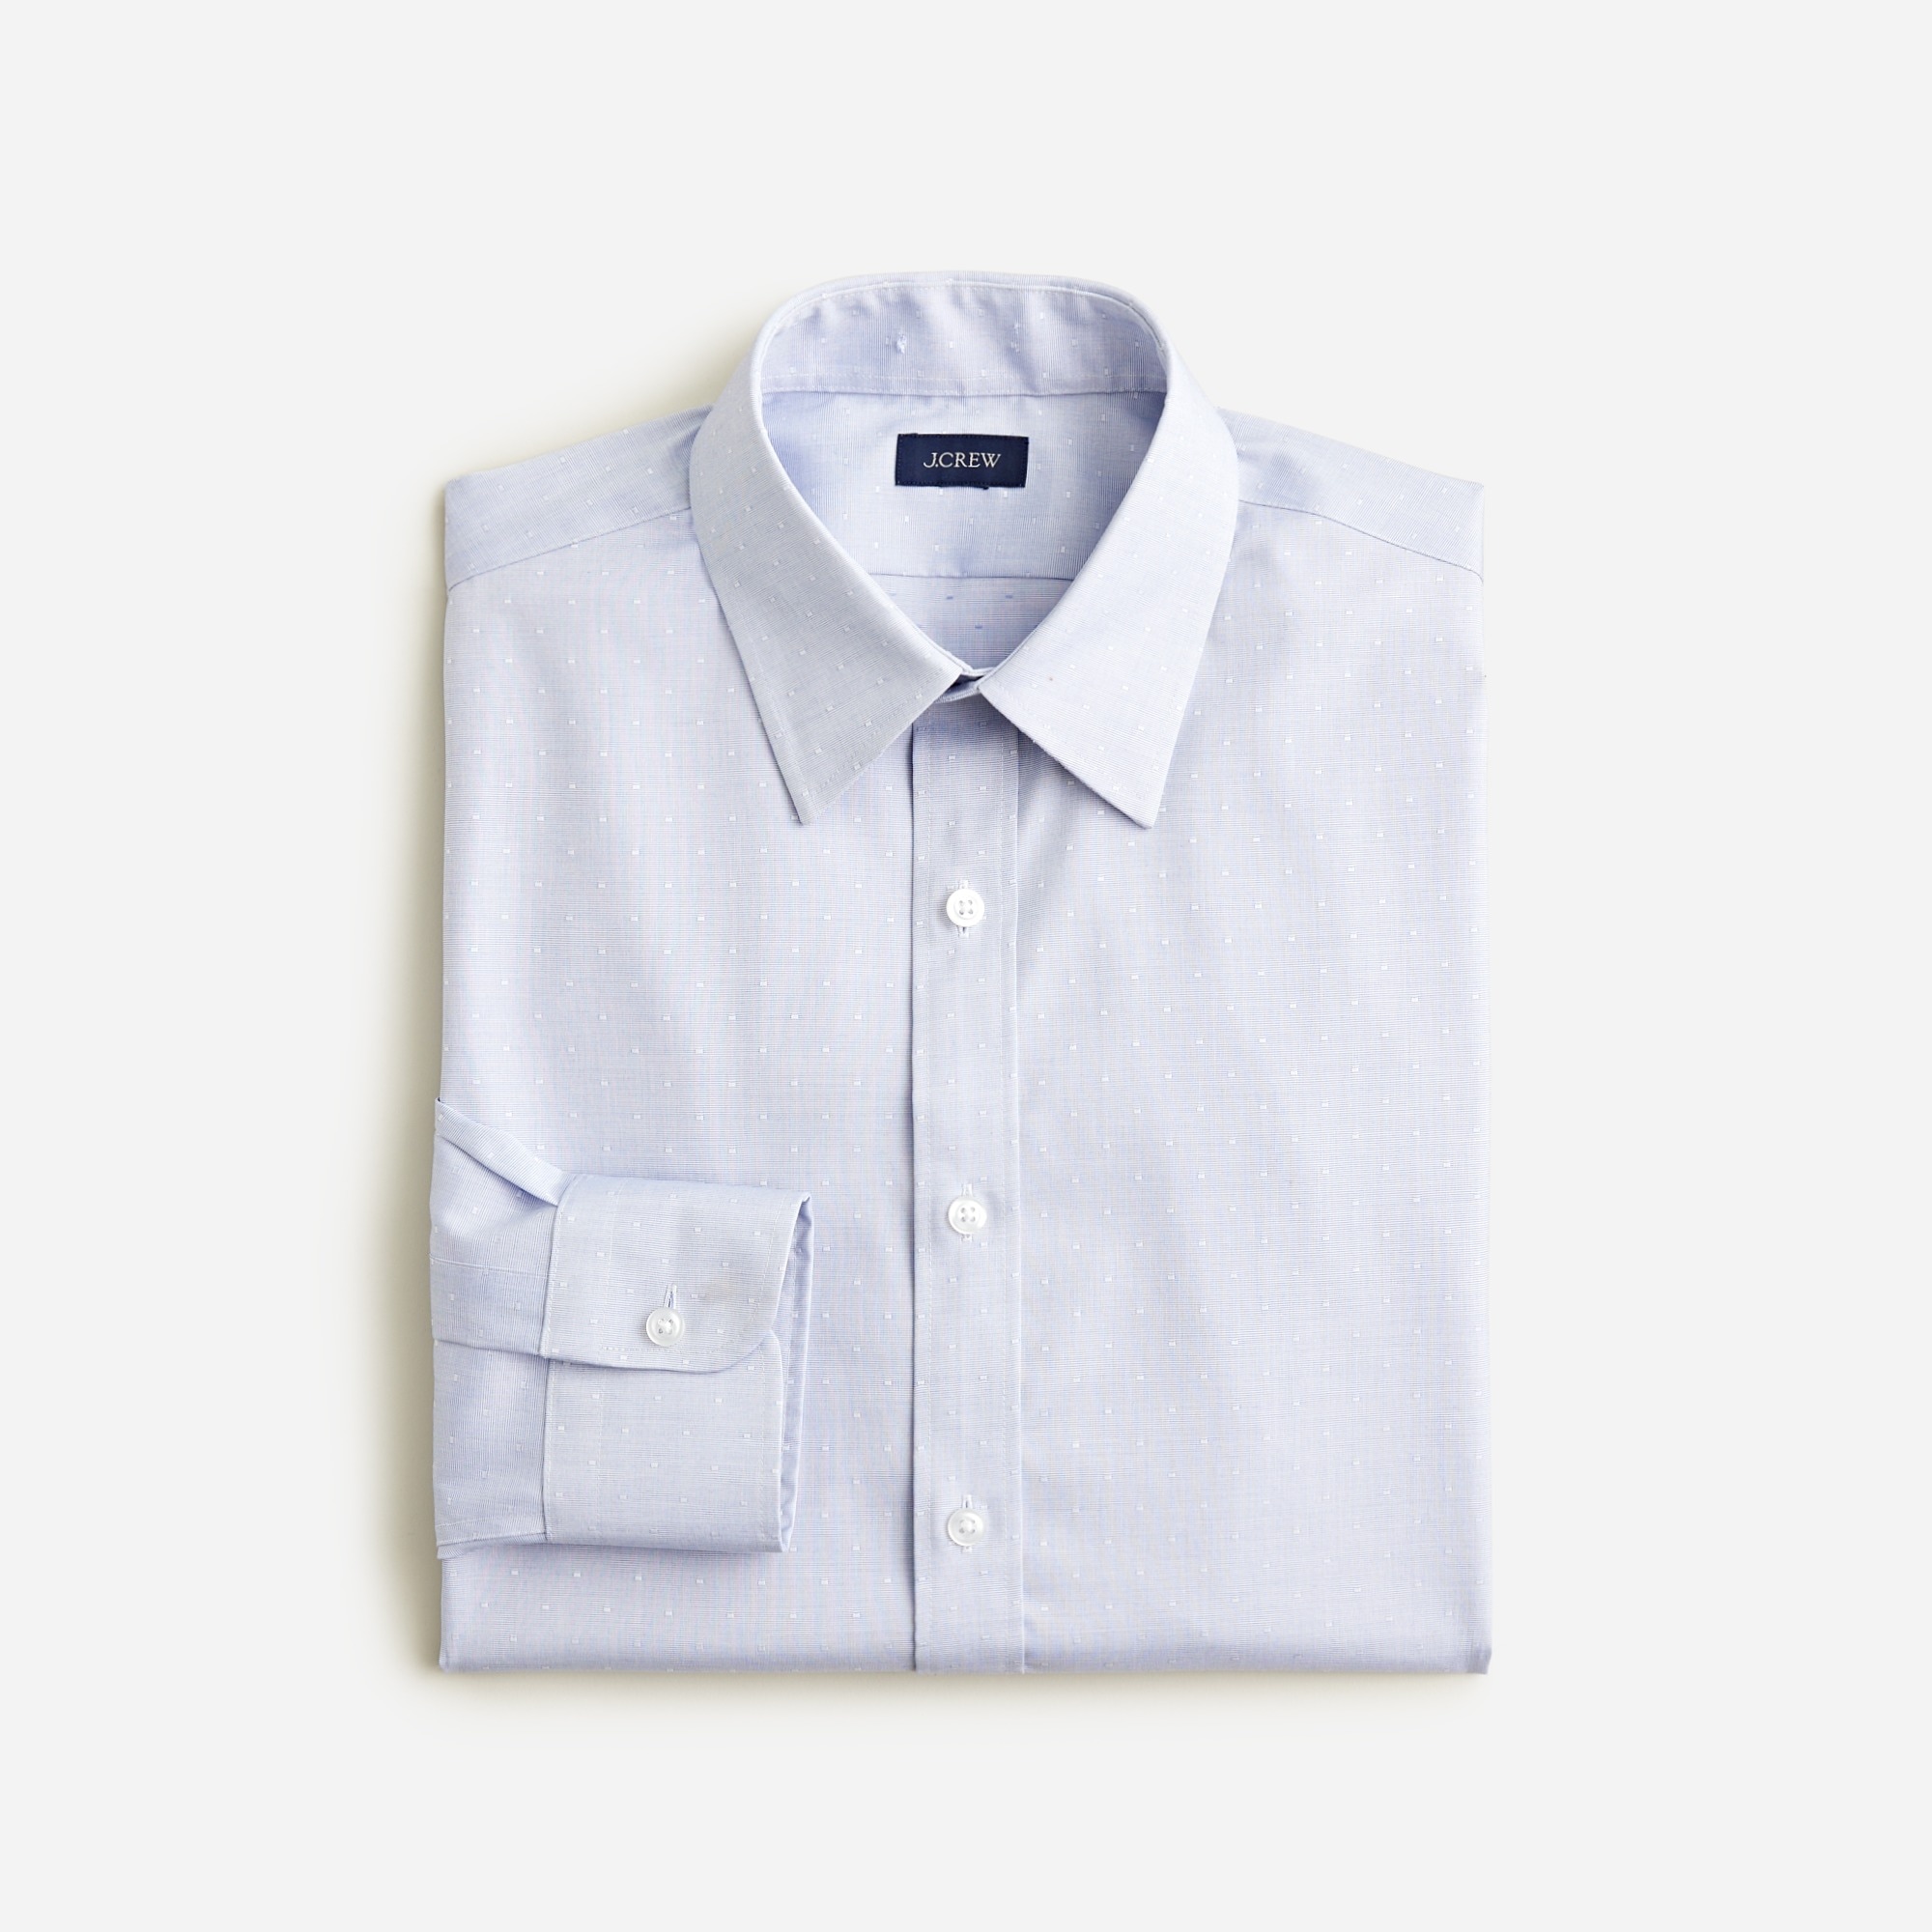 mens Bowery wrinkle-free dobby dress shirt with point collar